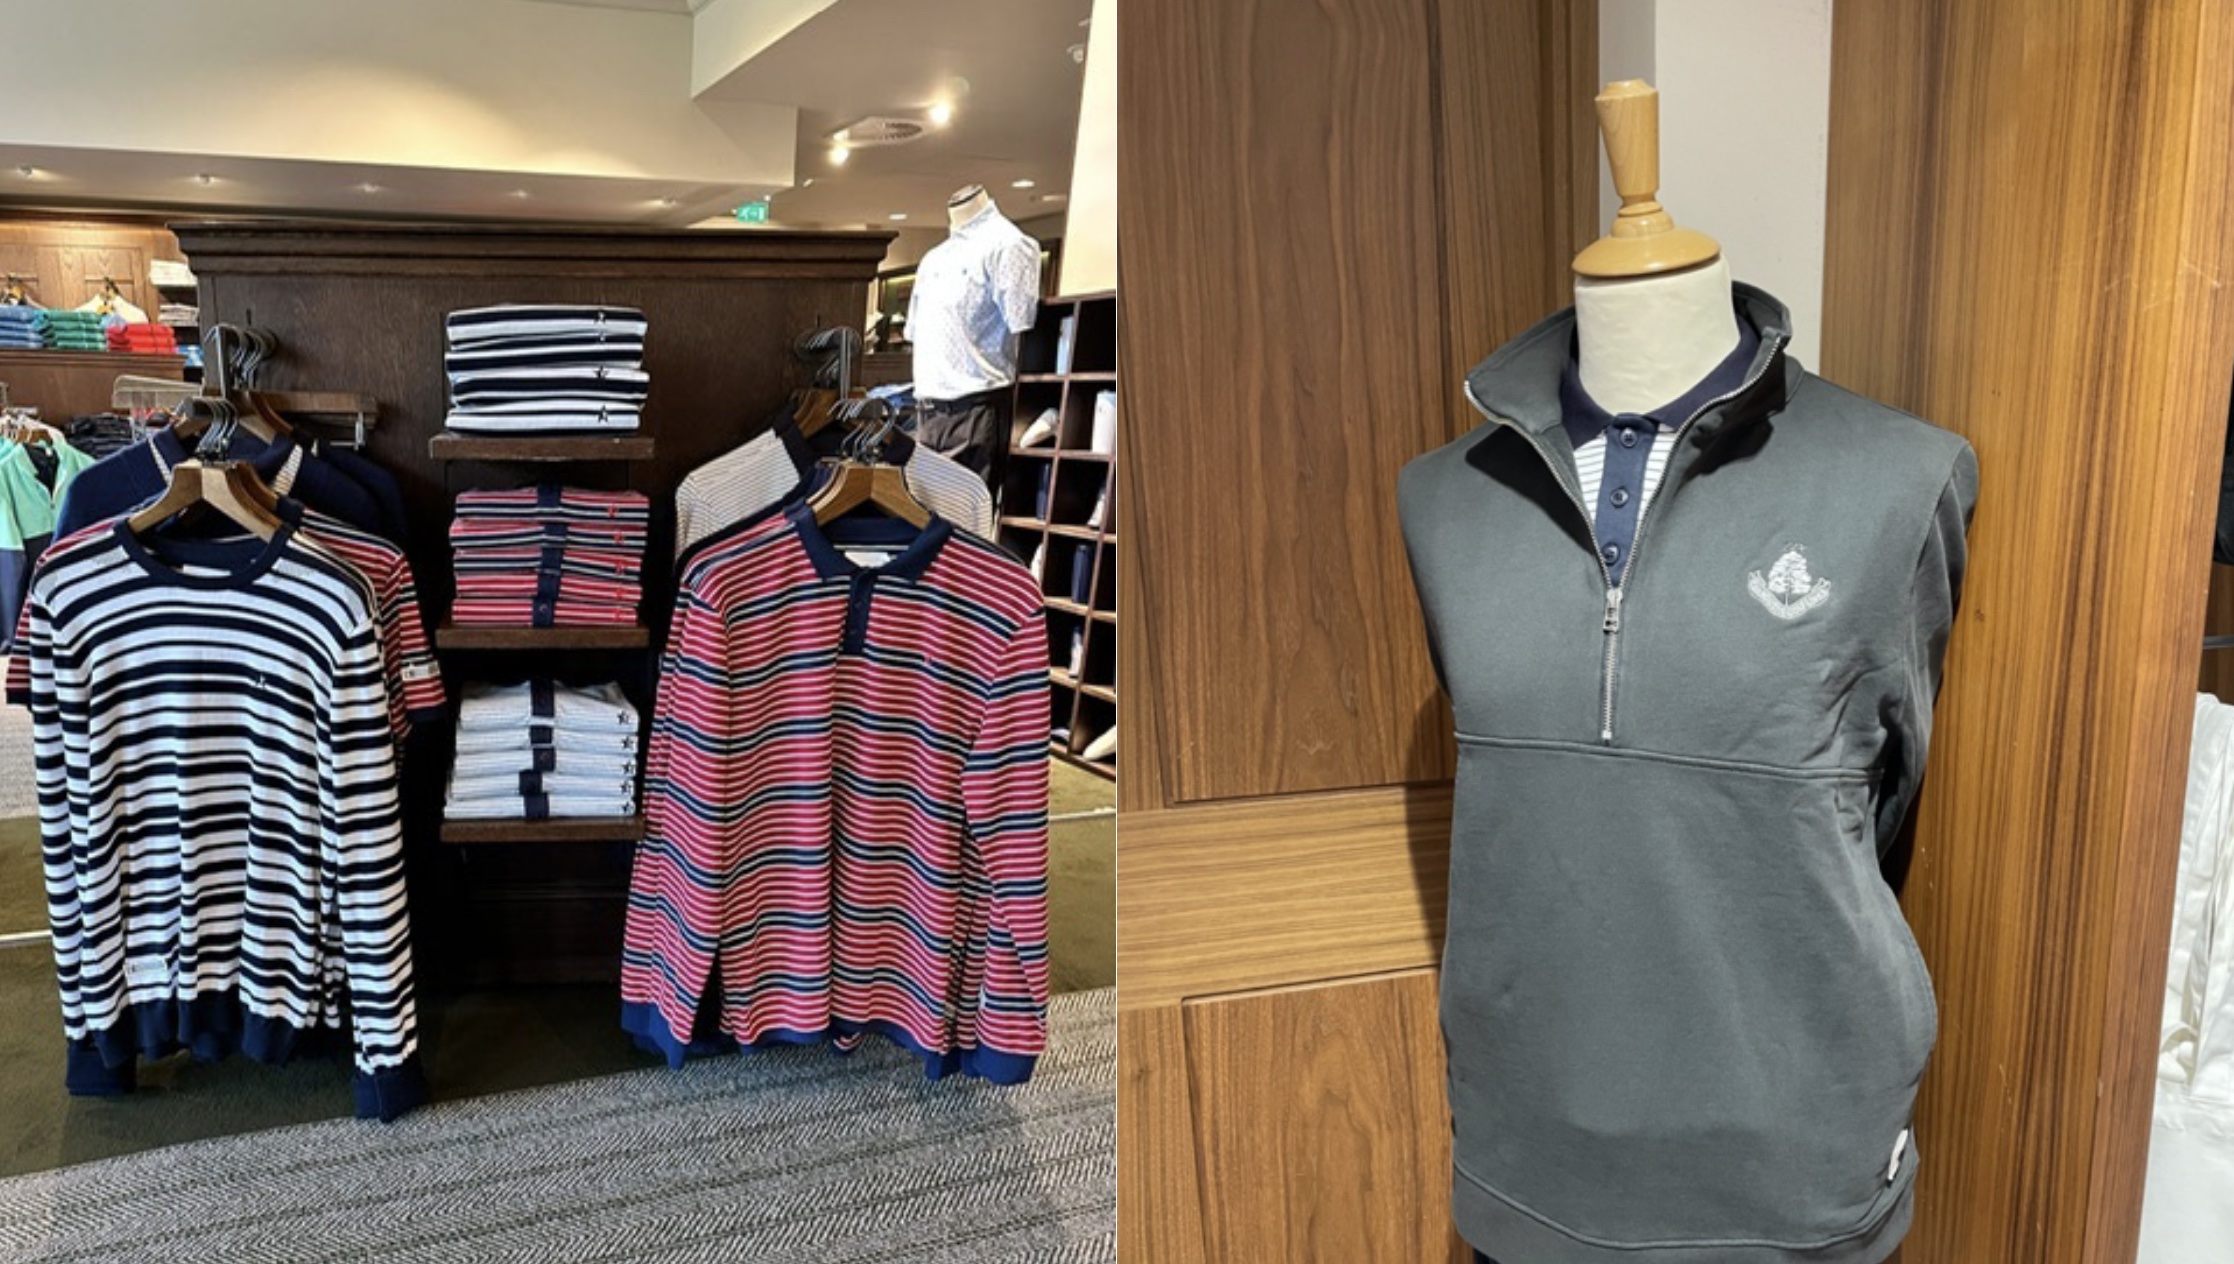 Sounder apparel in stock at Carnoustie and Gleneagles